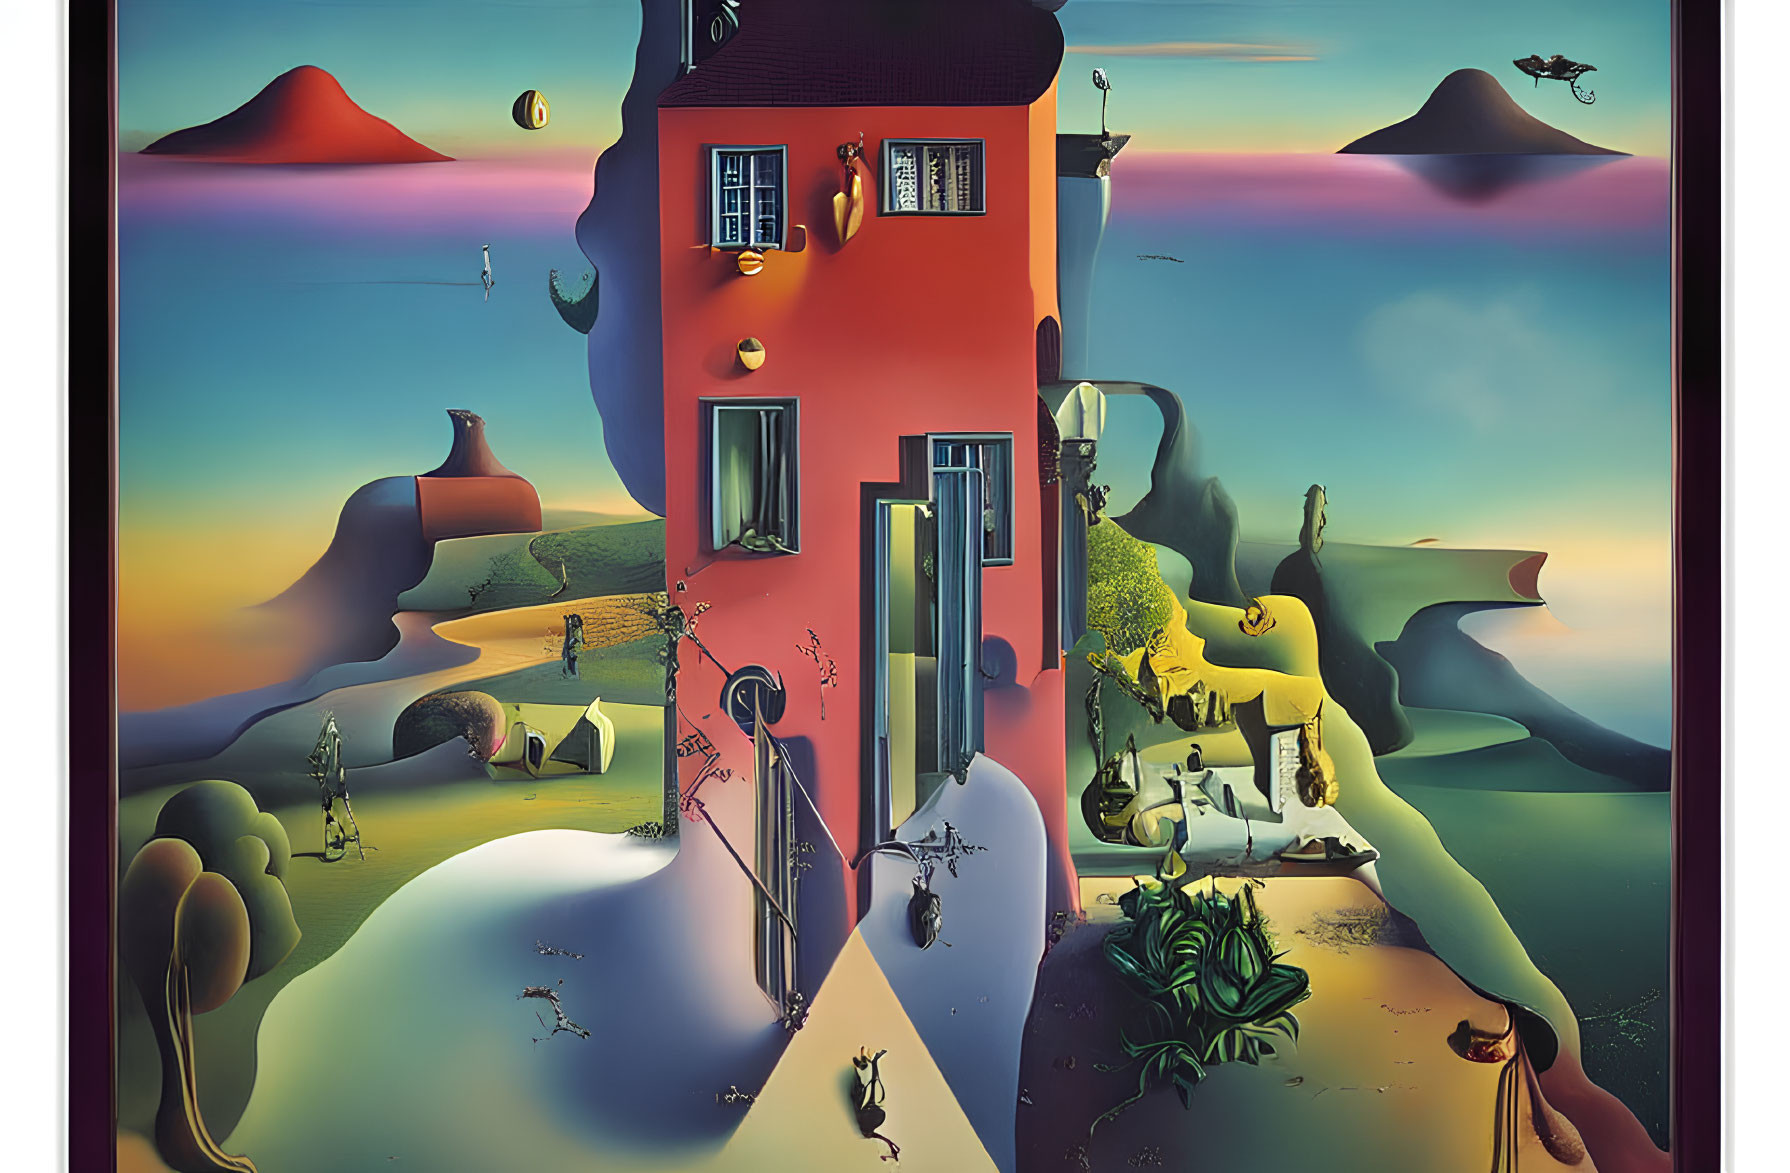 Surreal landscape with melting clock, whimsical characters, and red house under twilight sky